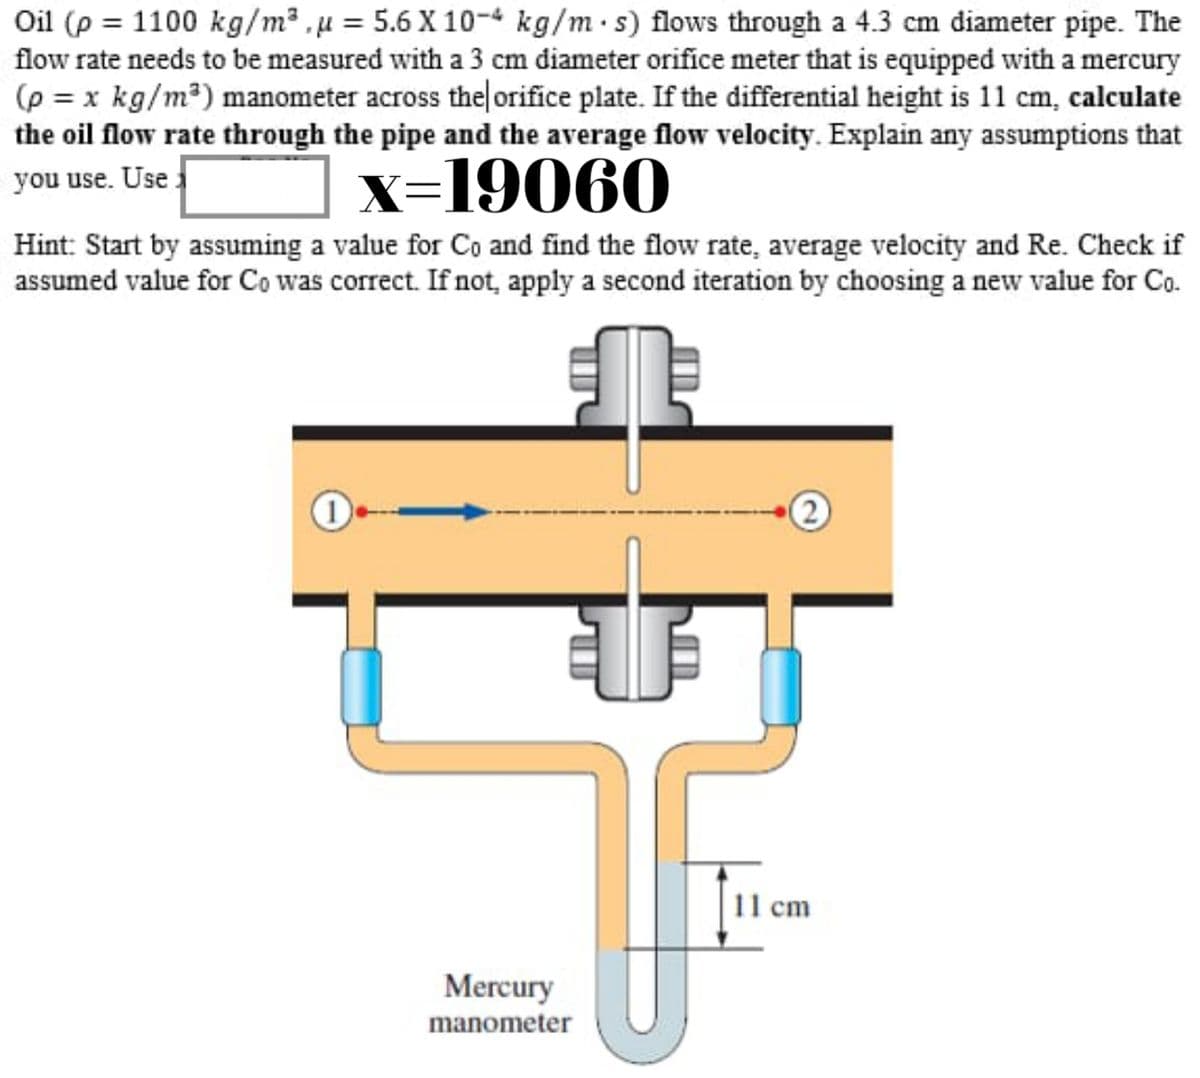 Oil (p = 1100 kg/m² , µ = 5.6 X 10-4 kg/m·s) flows through a 4.3 cm diameter pipe. The
flow rate needs to be measured with a 3 cm diameter orifice meter that is equipped with a mercury
(p = x kg/m?) manometer across the orifice plate. If the differential height is 11 cm, calculate
the oil flow rate through the pipe and the average flow velocity. Explain any assumptions that
you use. Use
x=19060
Hint: Start by assuming a value for Co and find the flow rate, average velocity and Re. Check if
assumed value for Co was correct. If not, apply a second iteration by choosing a new value for Co.
2)
11 cm
Mercury
manometer
